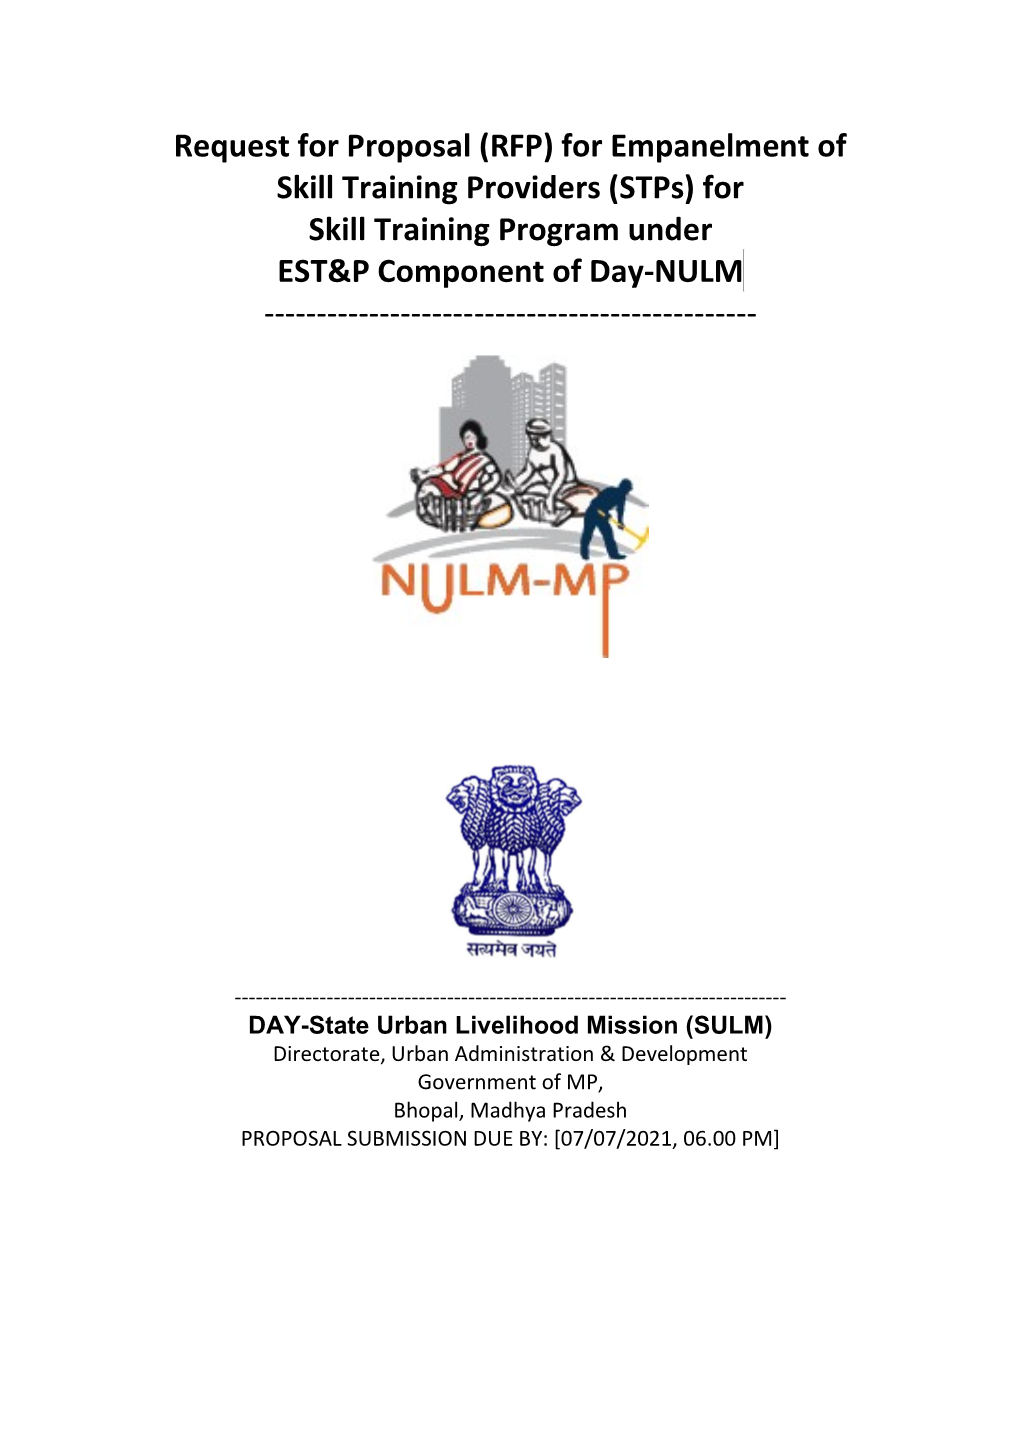 Request for Proposal (RFP) for Empanelment of Skill Training Providers (Stps) for Skill Training Program Under EST&P Component of Day-NULM